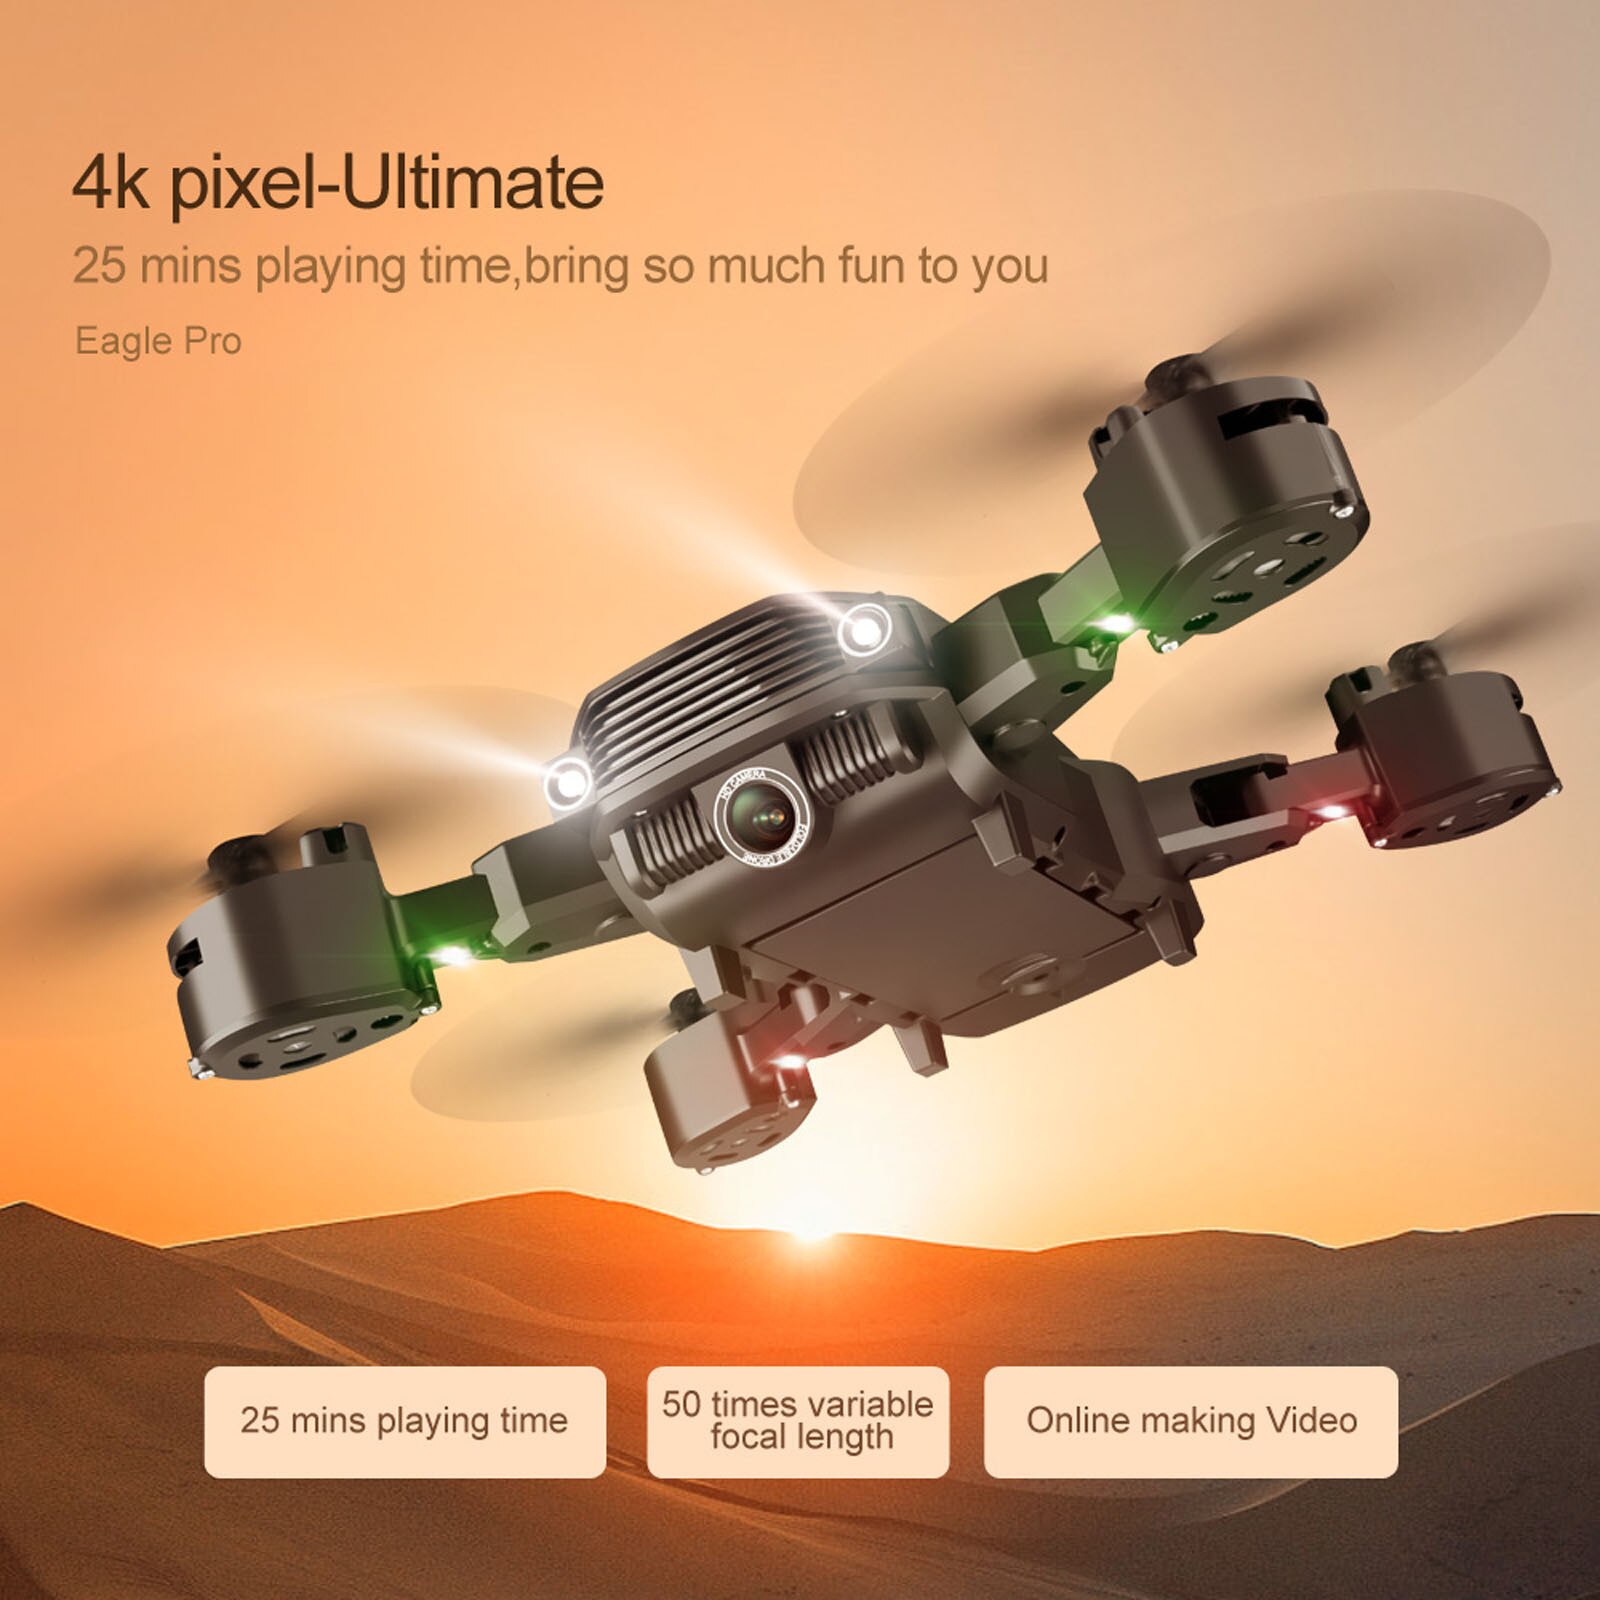 LSRC-LS11 Camera Drones 4K/1080p HD dual-lens camera high resolution drone rc Helicopters Camera drone toy